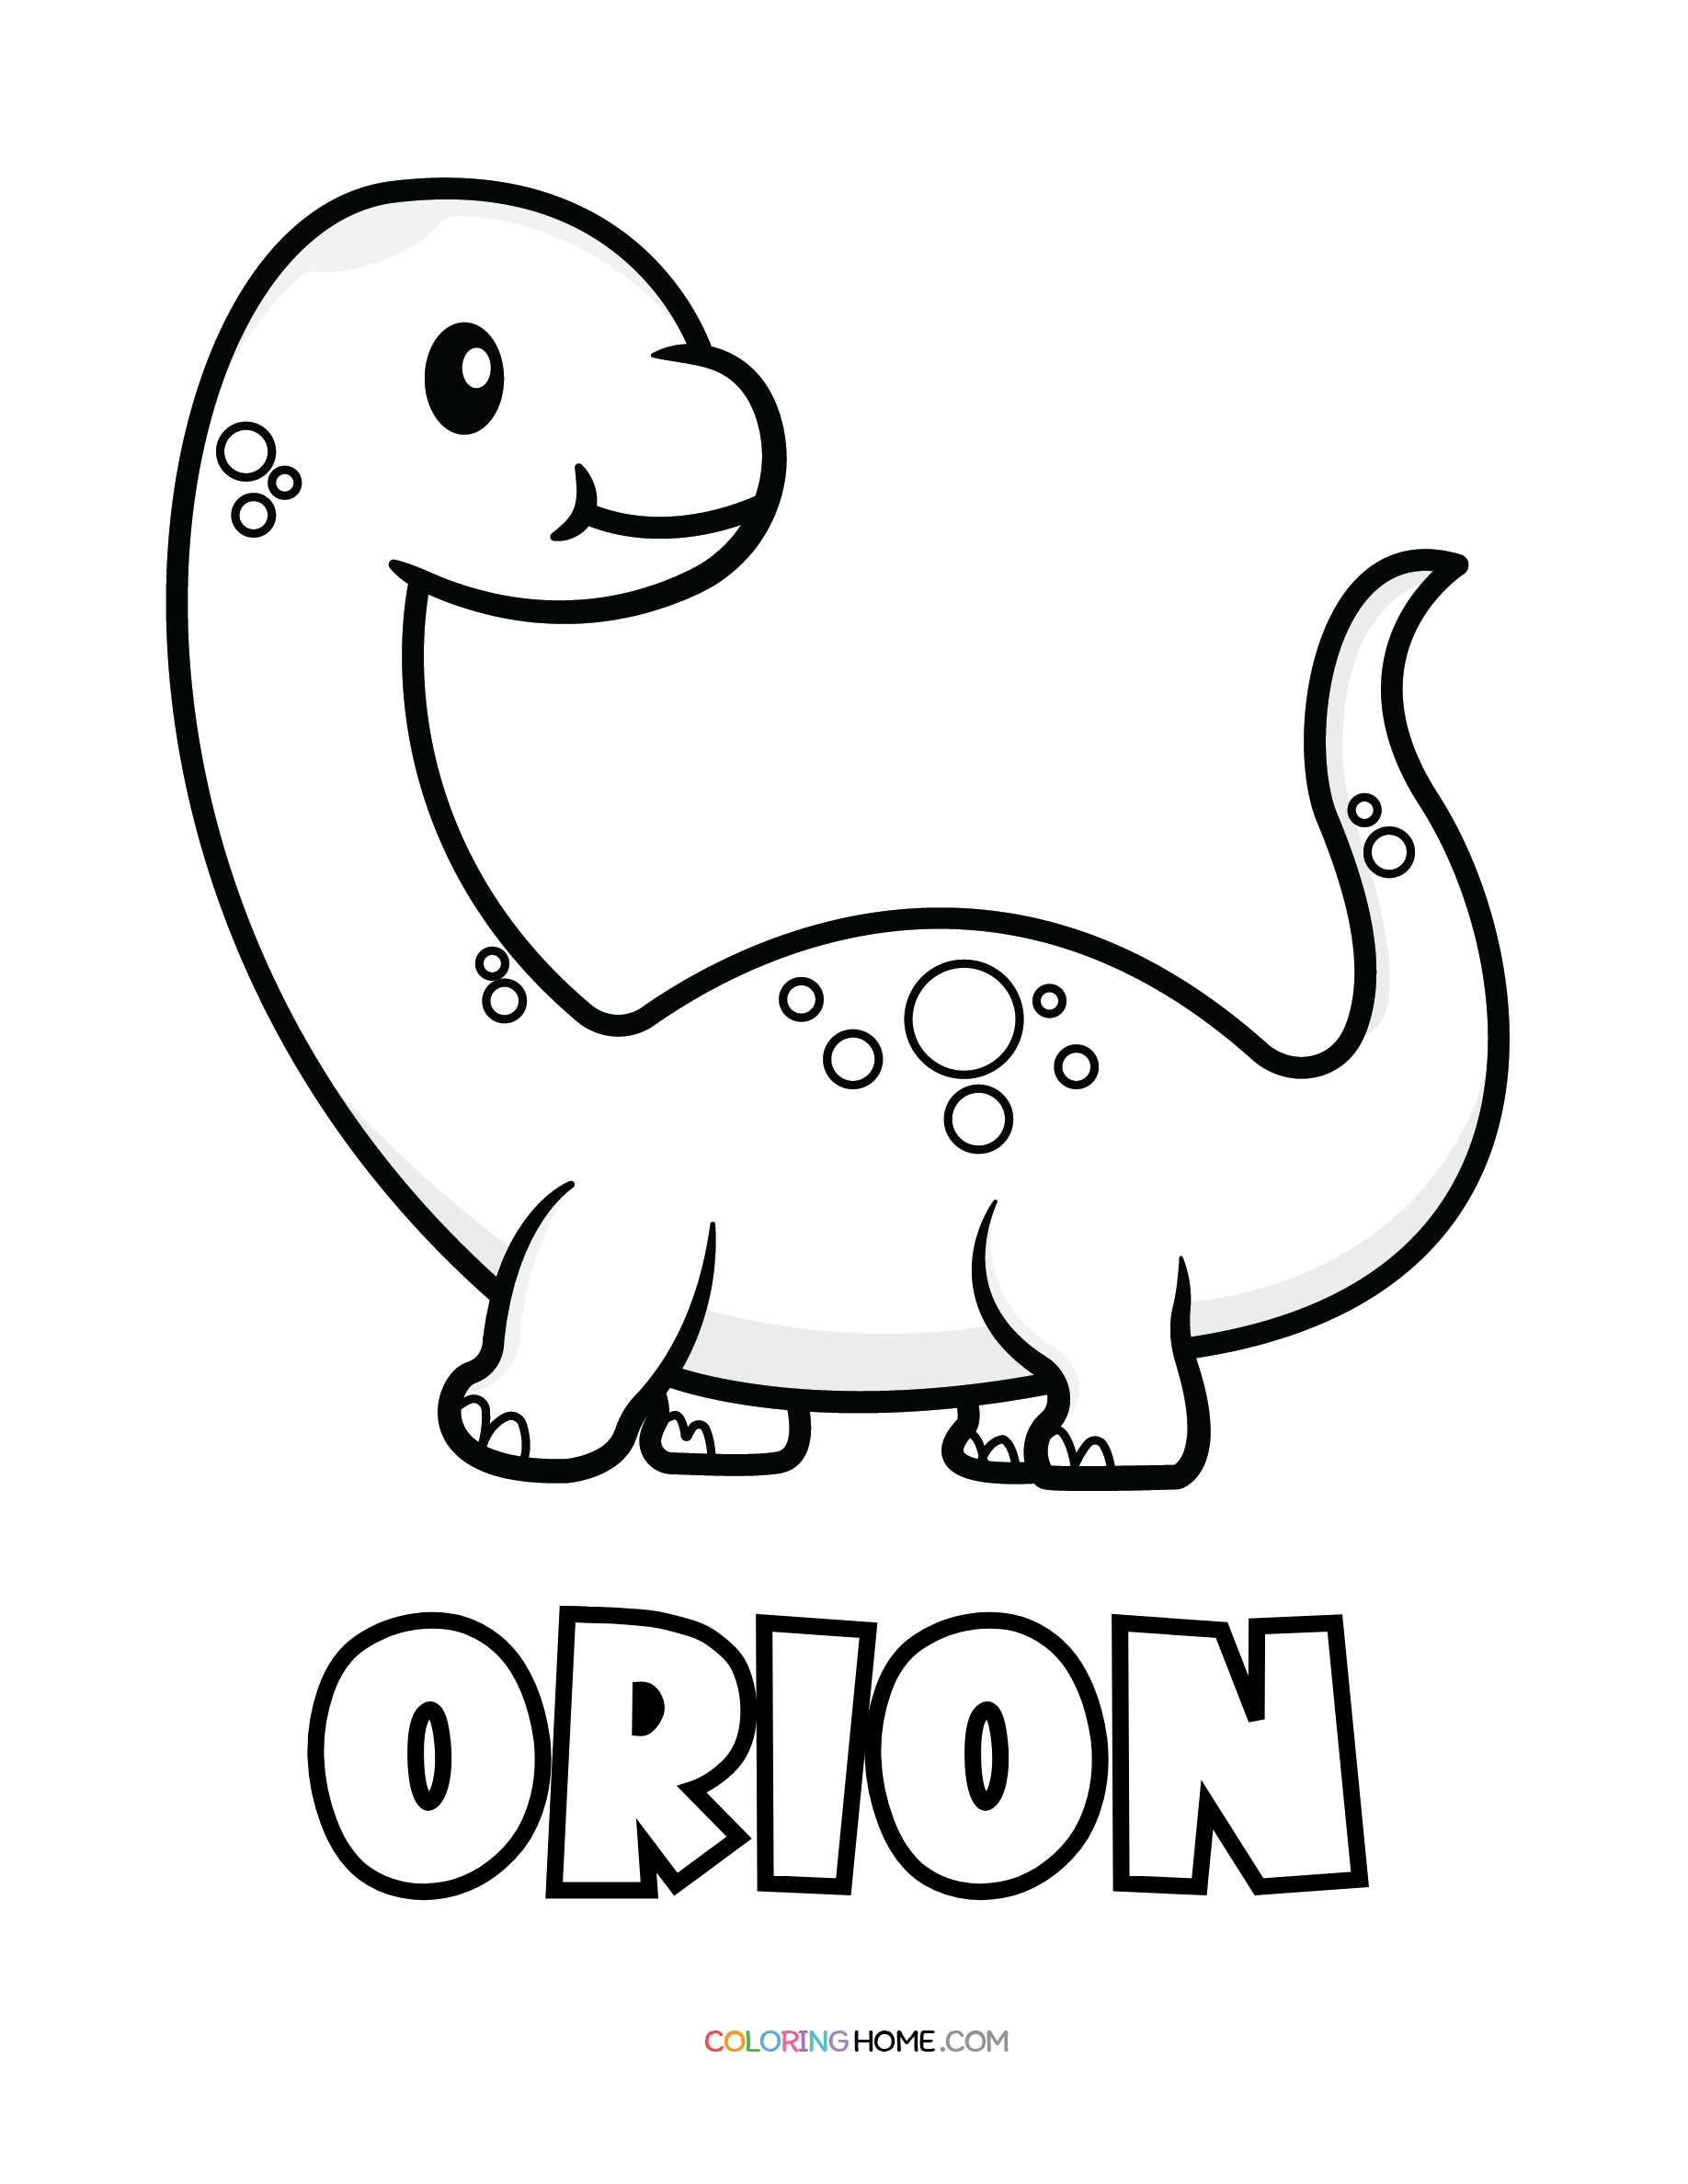 Orion dinosaur coloring page